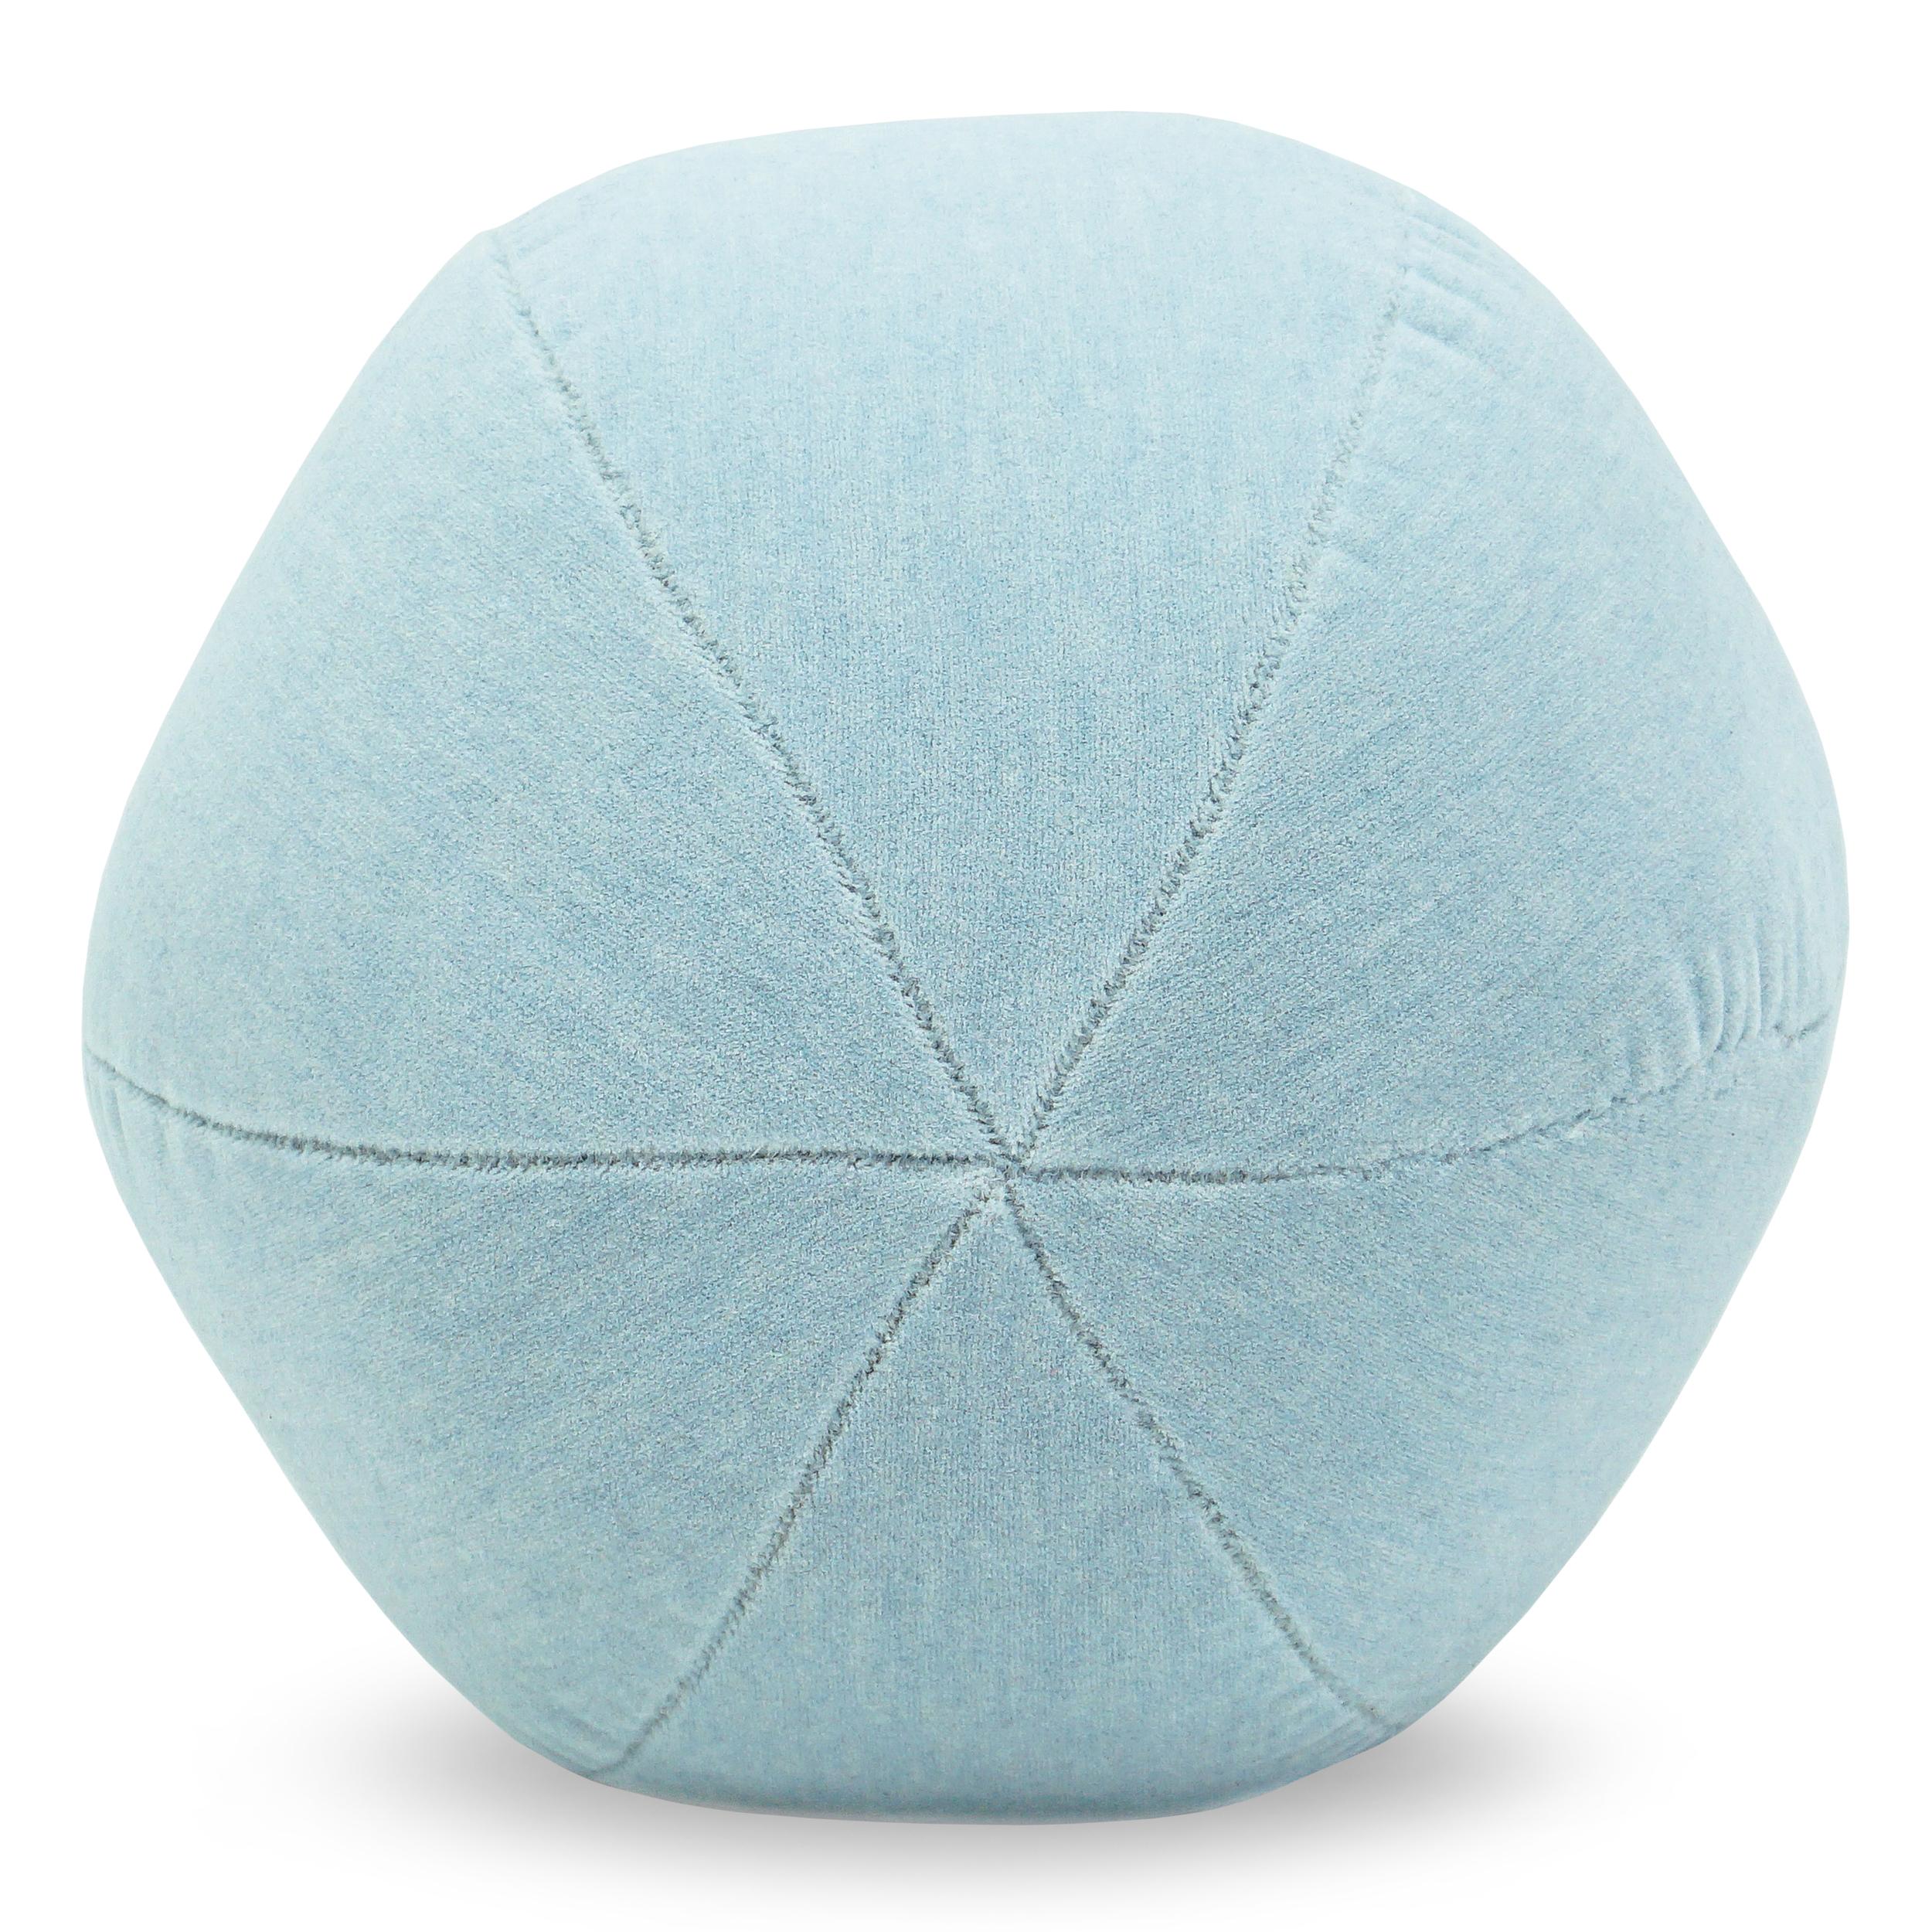 Soft terry-like cut velvet covers this playful ball. Stuffed with a feather down blend. Ball can be covered in any fabric. 

Measurements:
Overall: 12” W x 12” Dia.
Disclaimer: Due to their handcrafted nature, the final size and shape of our Ball